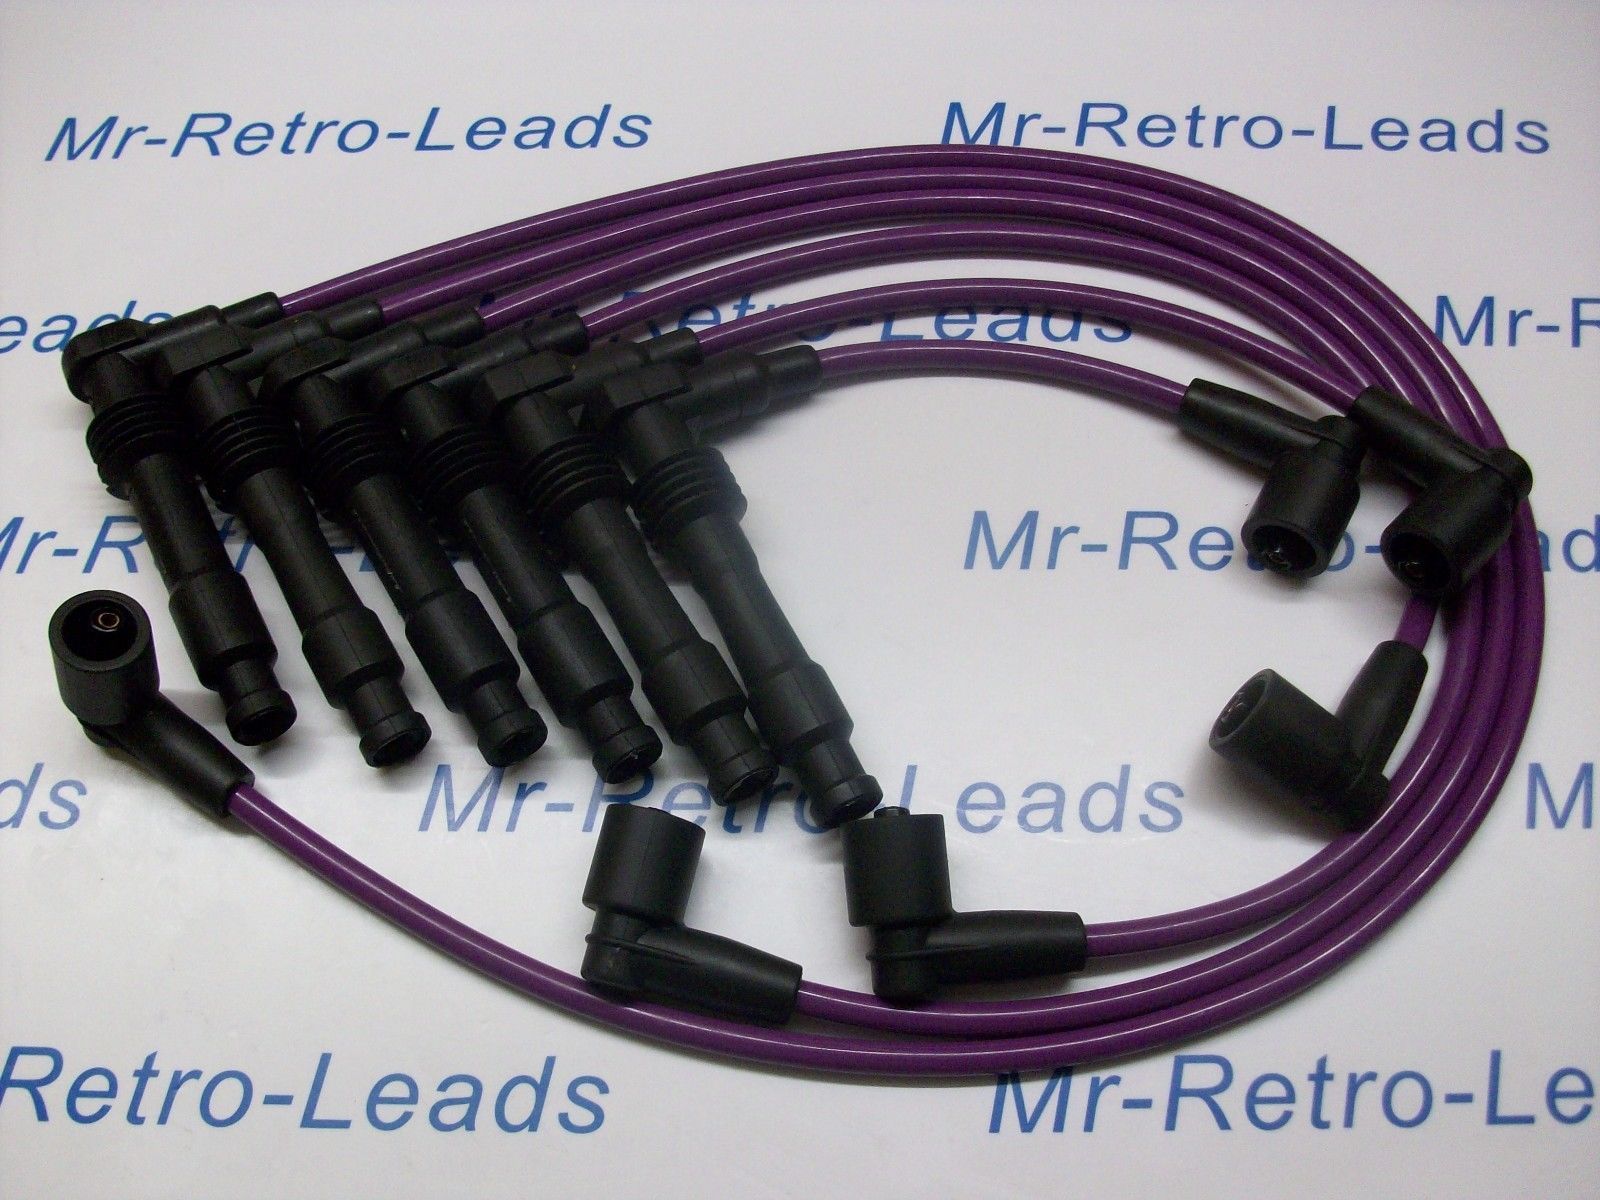 Purple 8mm Performance Ignition Leads To Fit Vauxhall Opel Omega V6. Pin Coil..